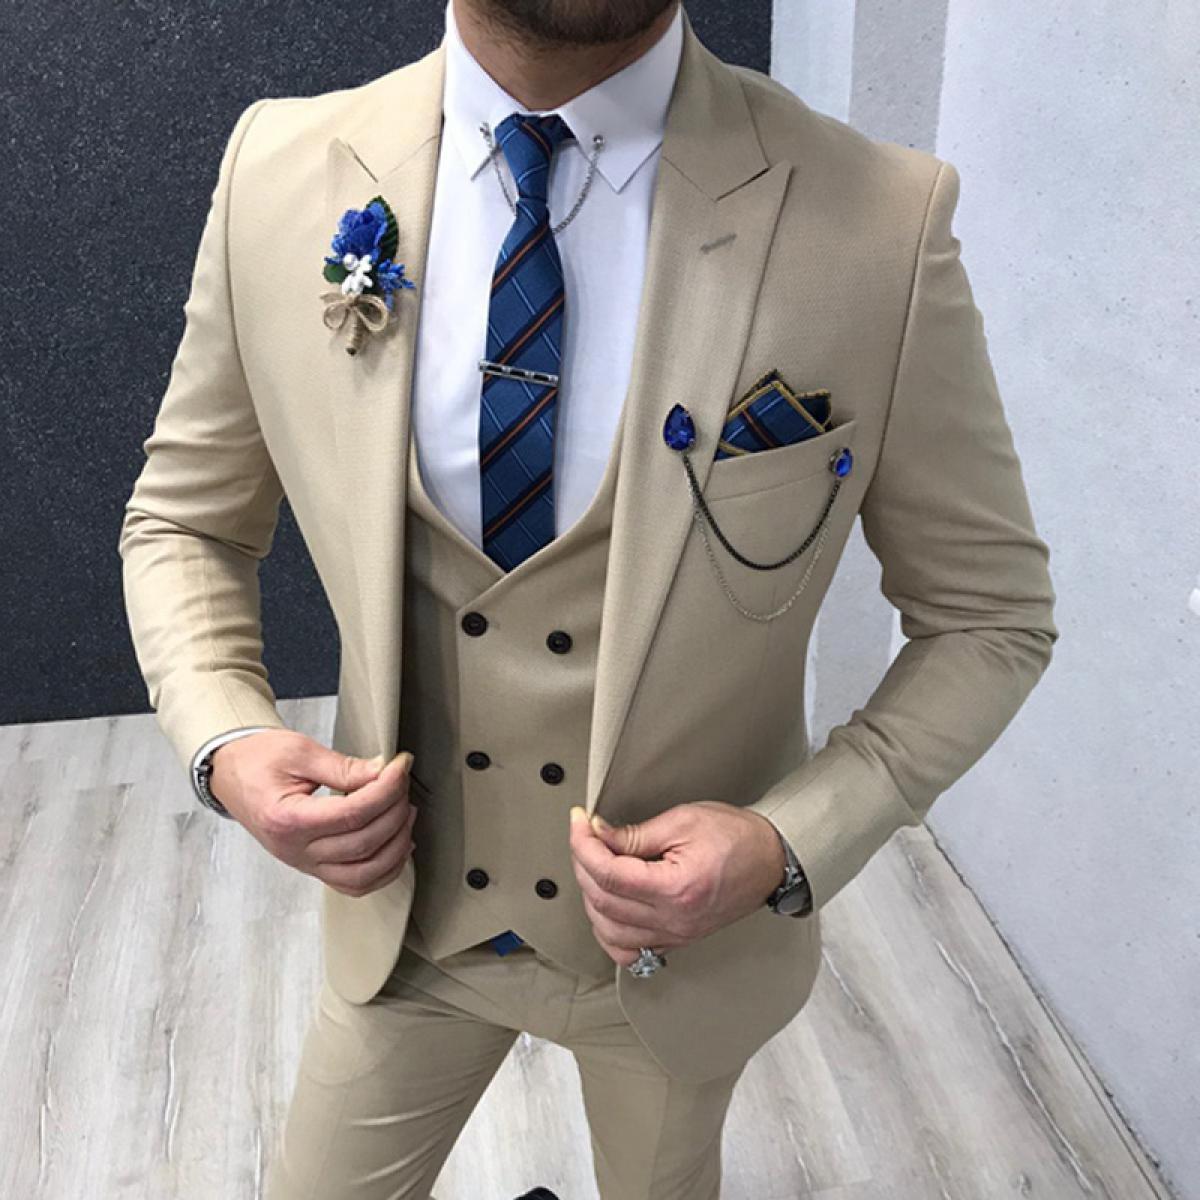 Slim Fit Cream Formal Men Suits For Groom 3 Piece Wedding Tuxedo Man Fashion Jacket Double Breasted Waistcoat With Pants